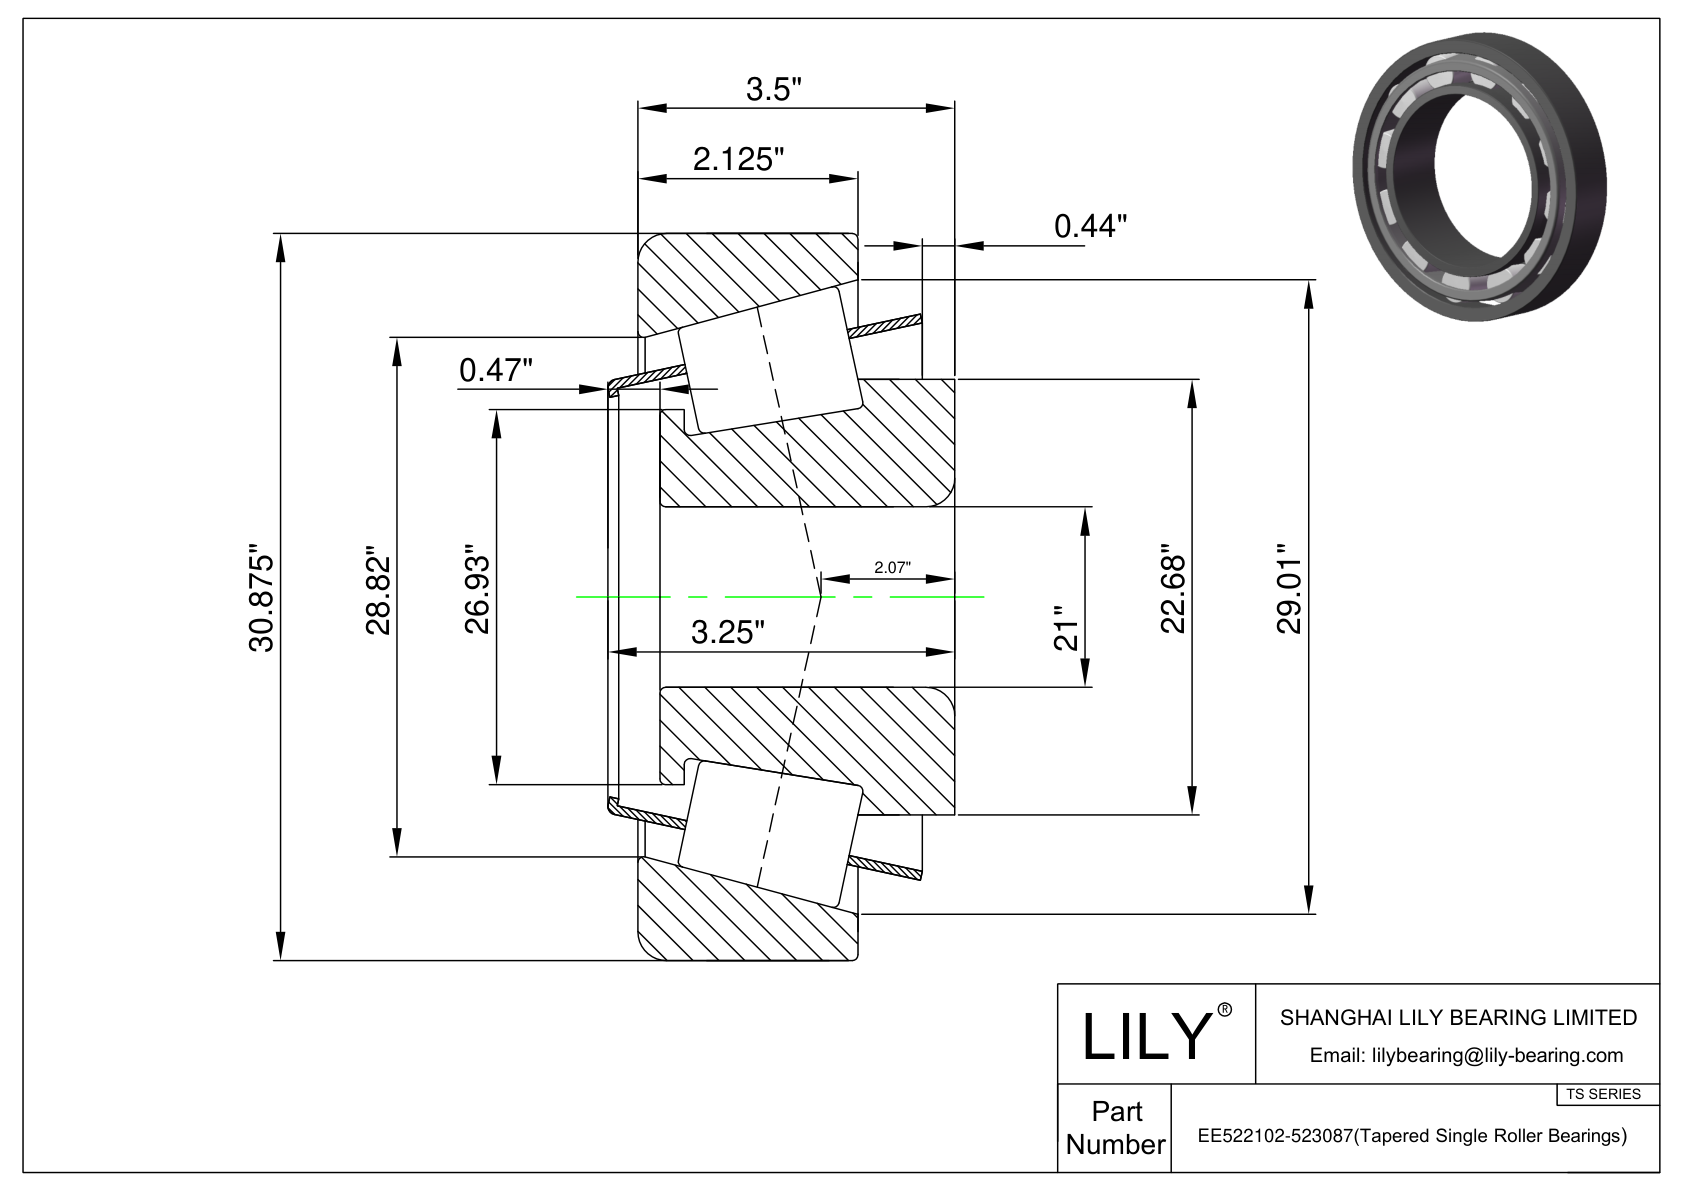 EE522102-523087 TS (Tapered Single Roller Bearings) (Imperial) cad drawing